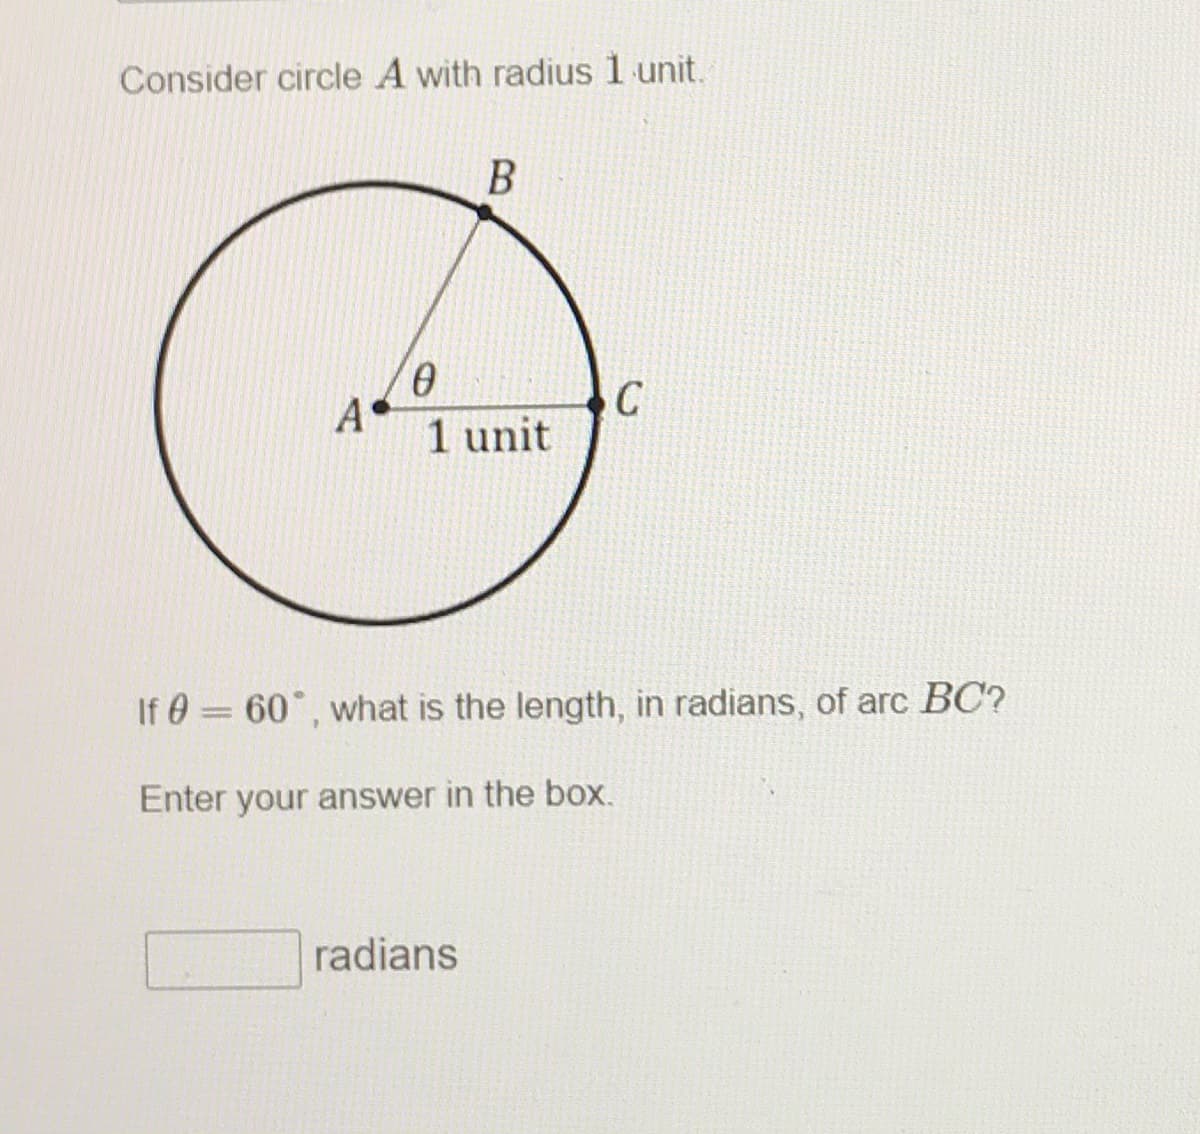 Consider circle A with radius 1 unit.
A
1 unit
If 0 = 60°, what is the length, in radians, of arc BC?
Enter your answer in the box.
radians
